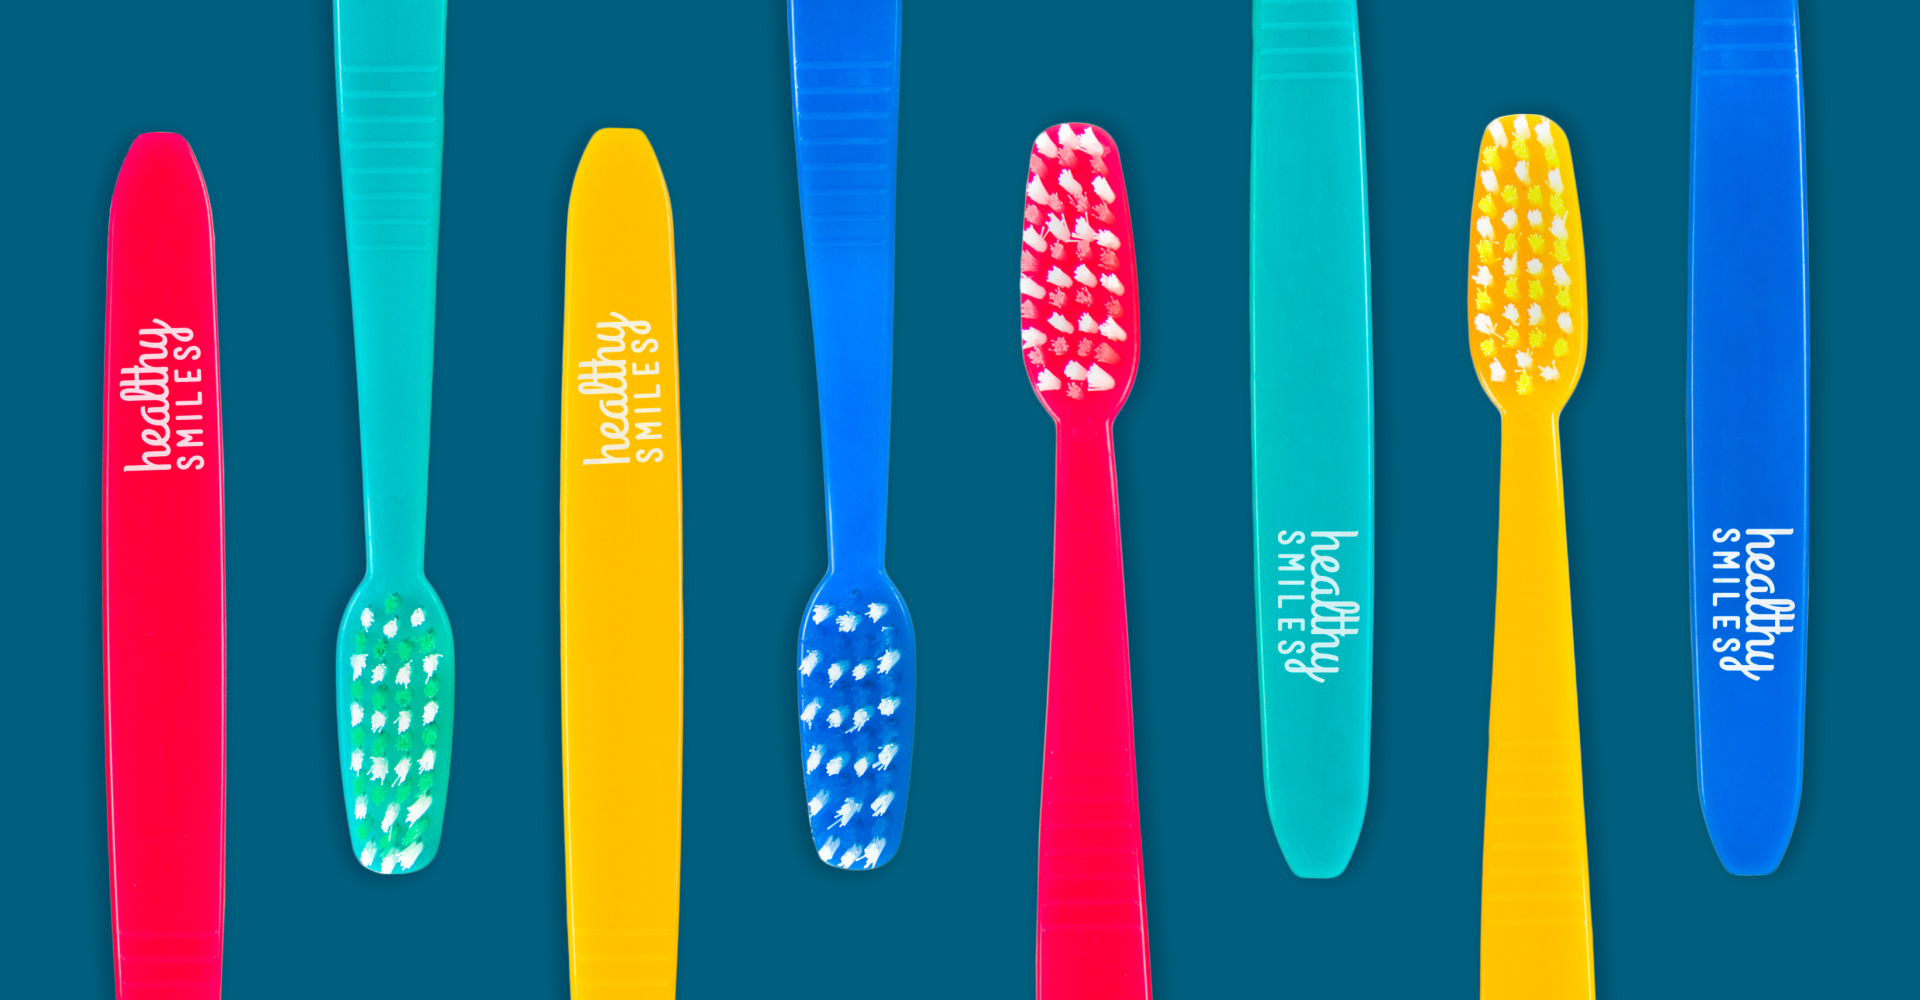 Healthy Smiles Toothbrushes